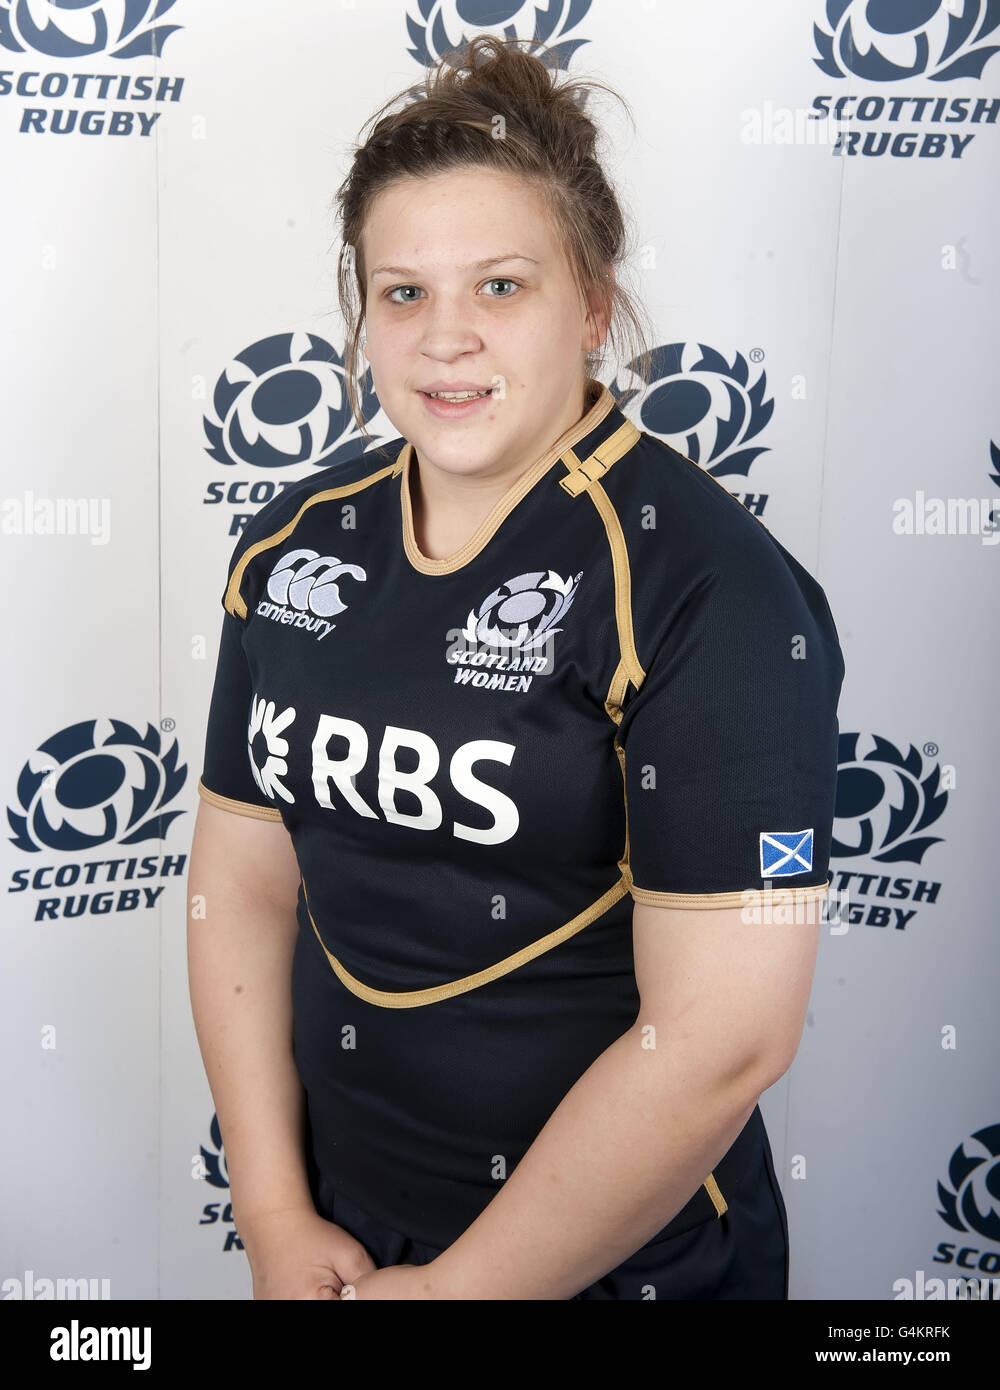 Rugby Union - Scotland Women's Headshots. Charlotte Lewis during a photocall at Murrayfield, Edinburgh. Stock Photo